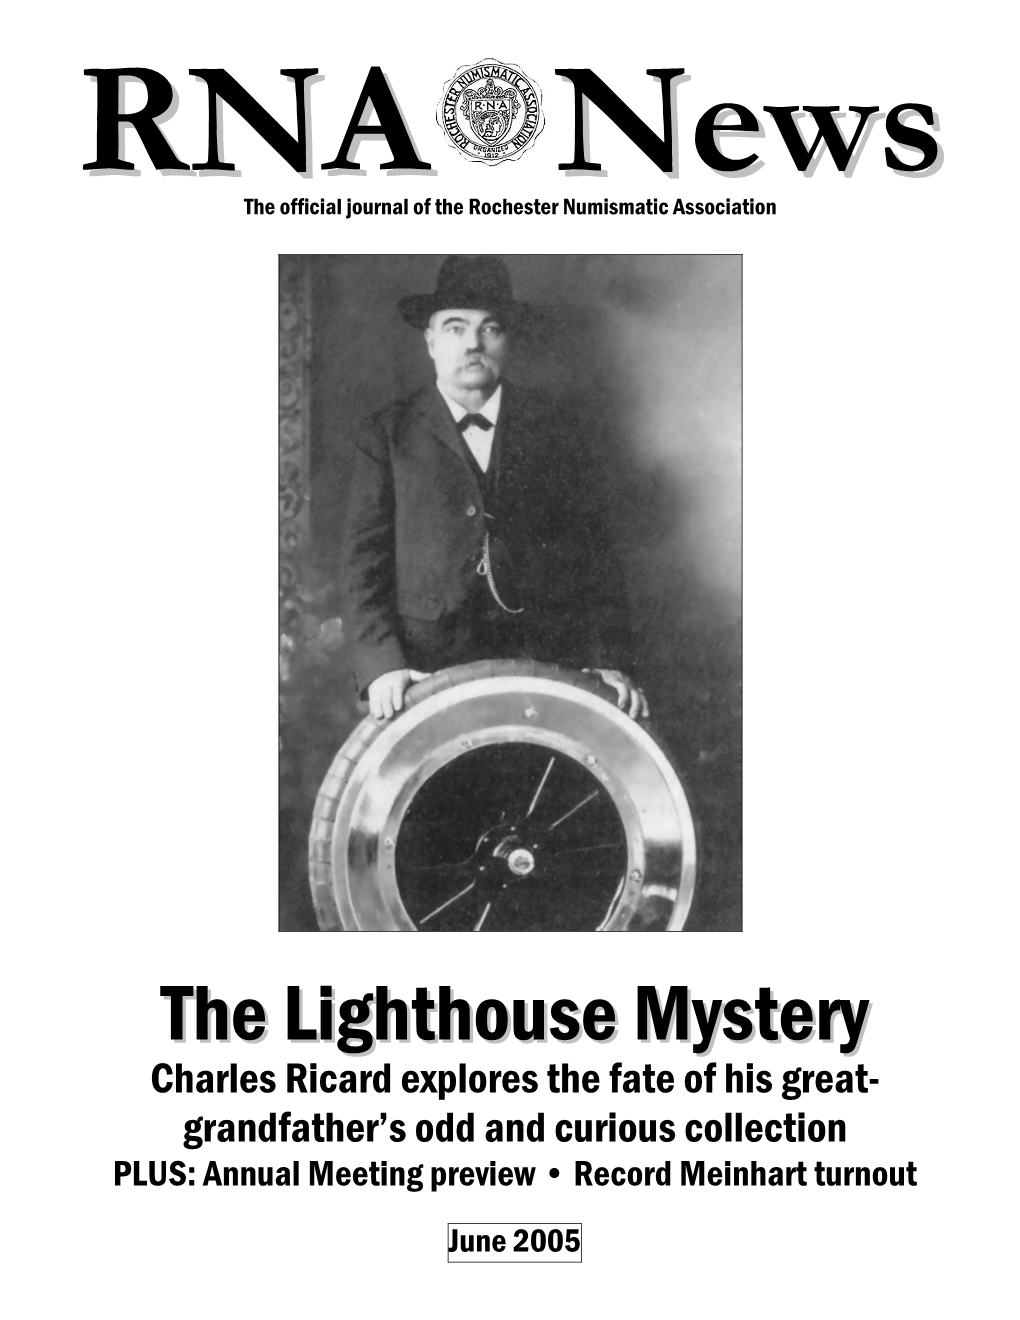 Thelighthousemystery